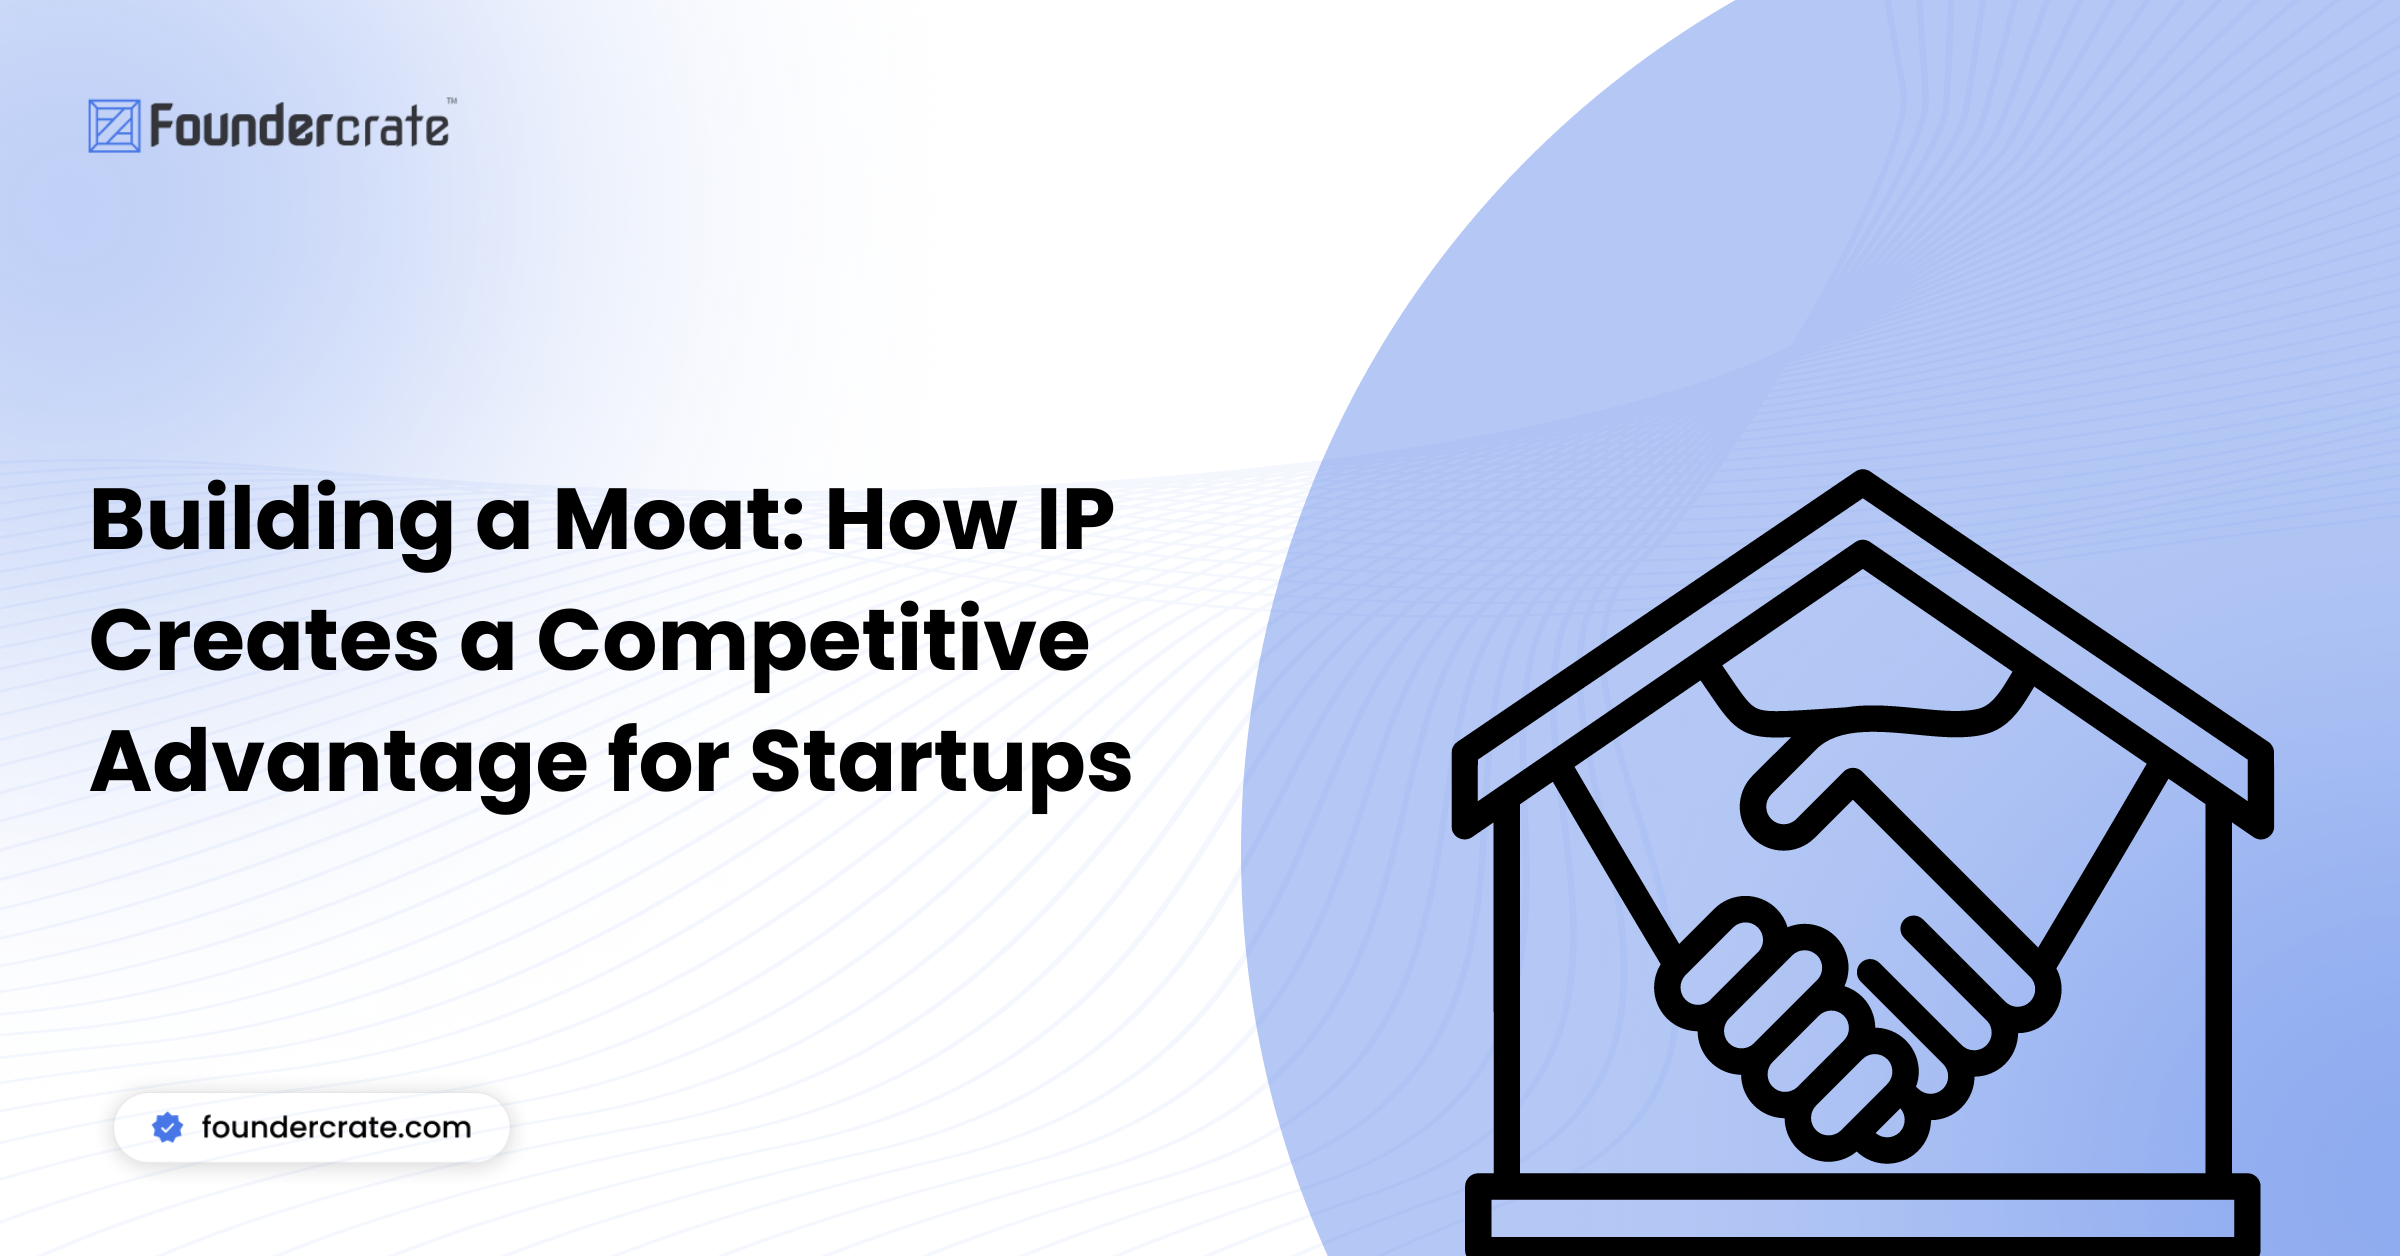 Building a Moat: How IP Creates a Competitive Advantage for Startups